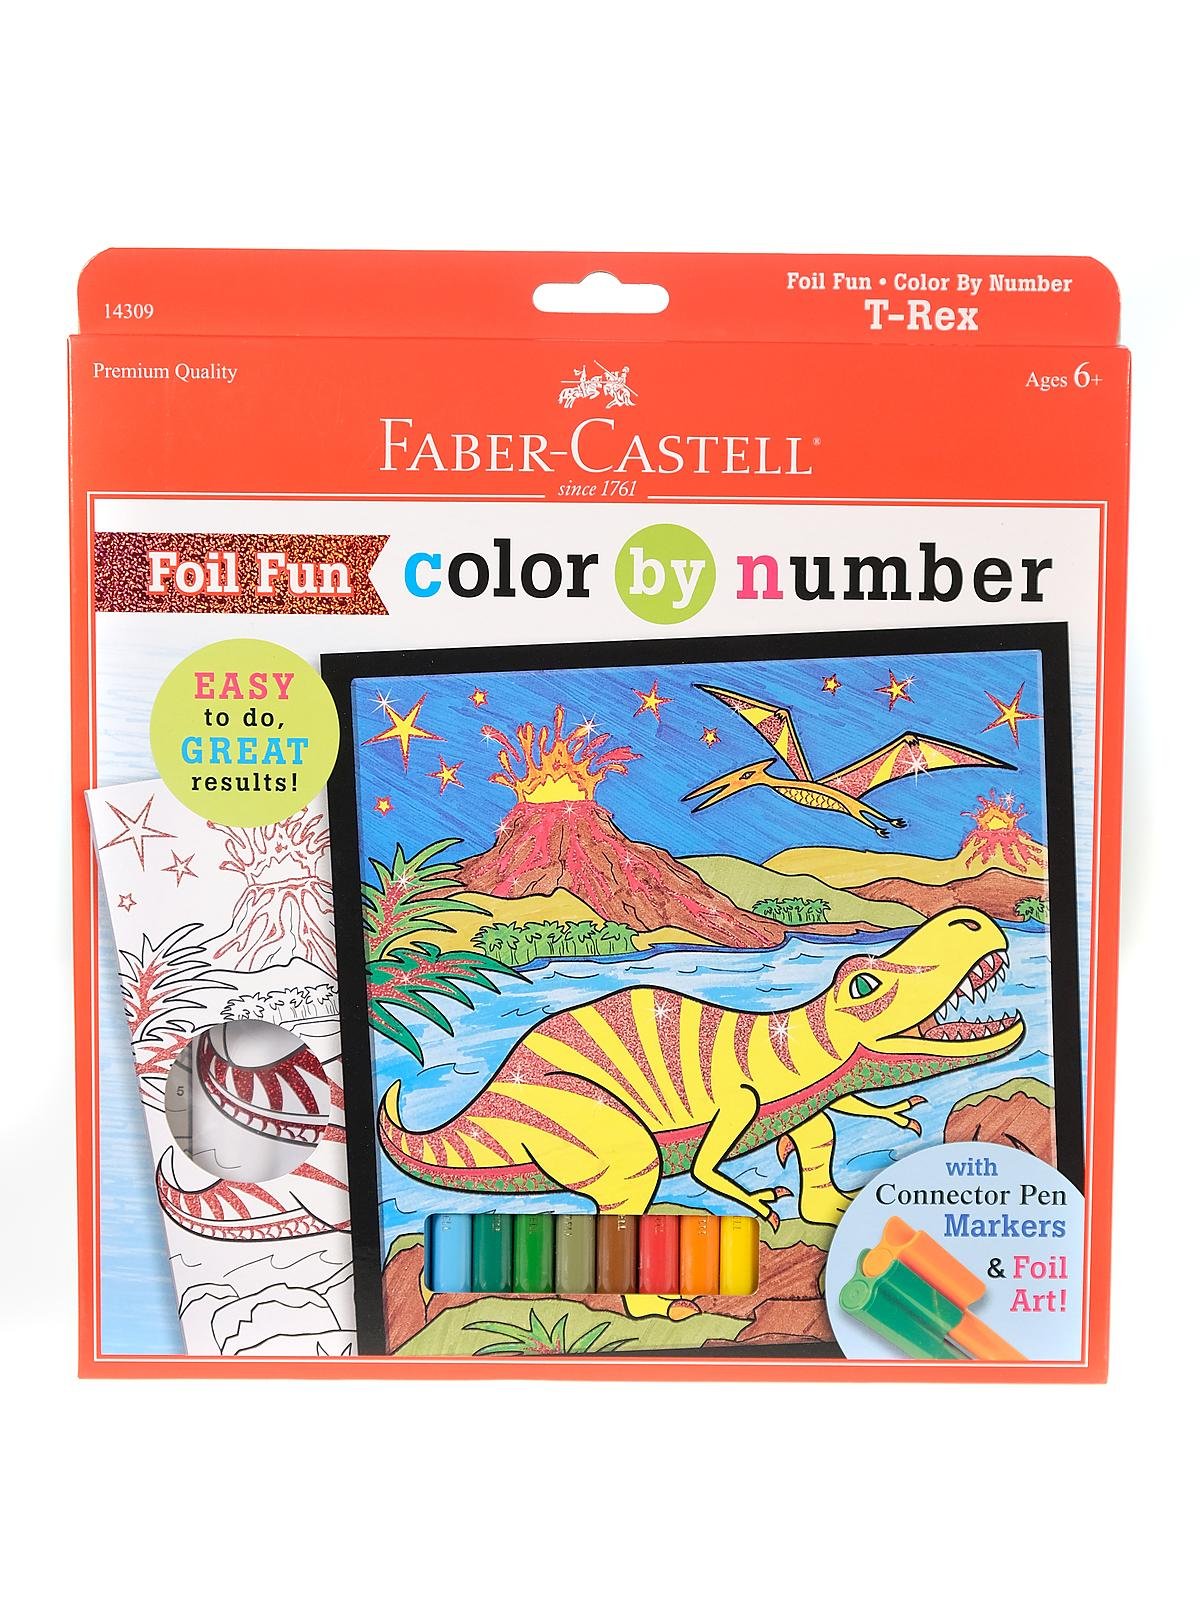 Faber Castell Color by Number Bloomin' Butterflies